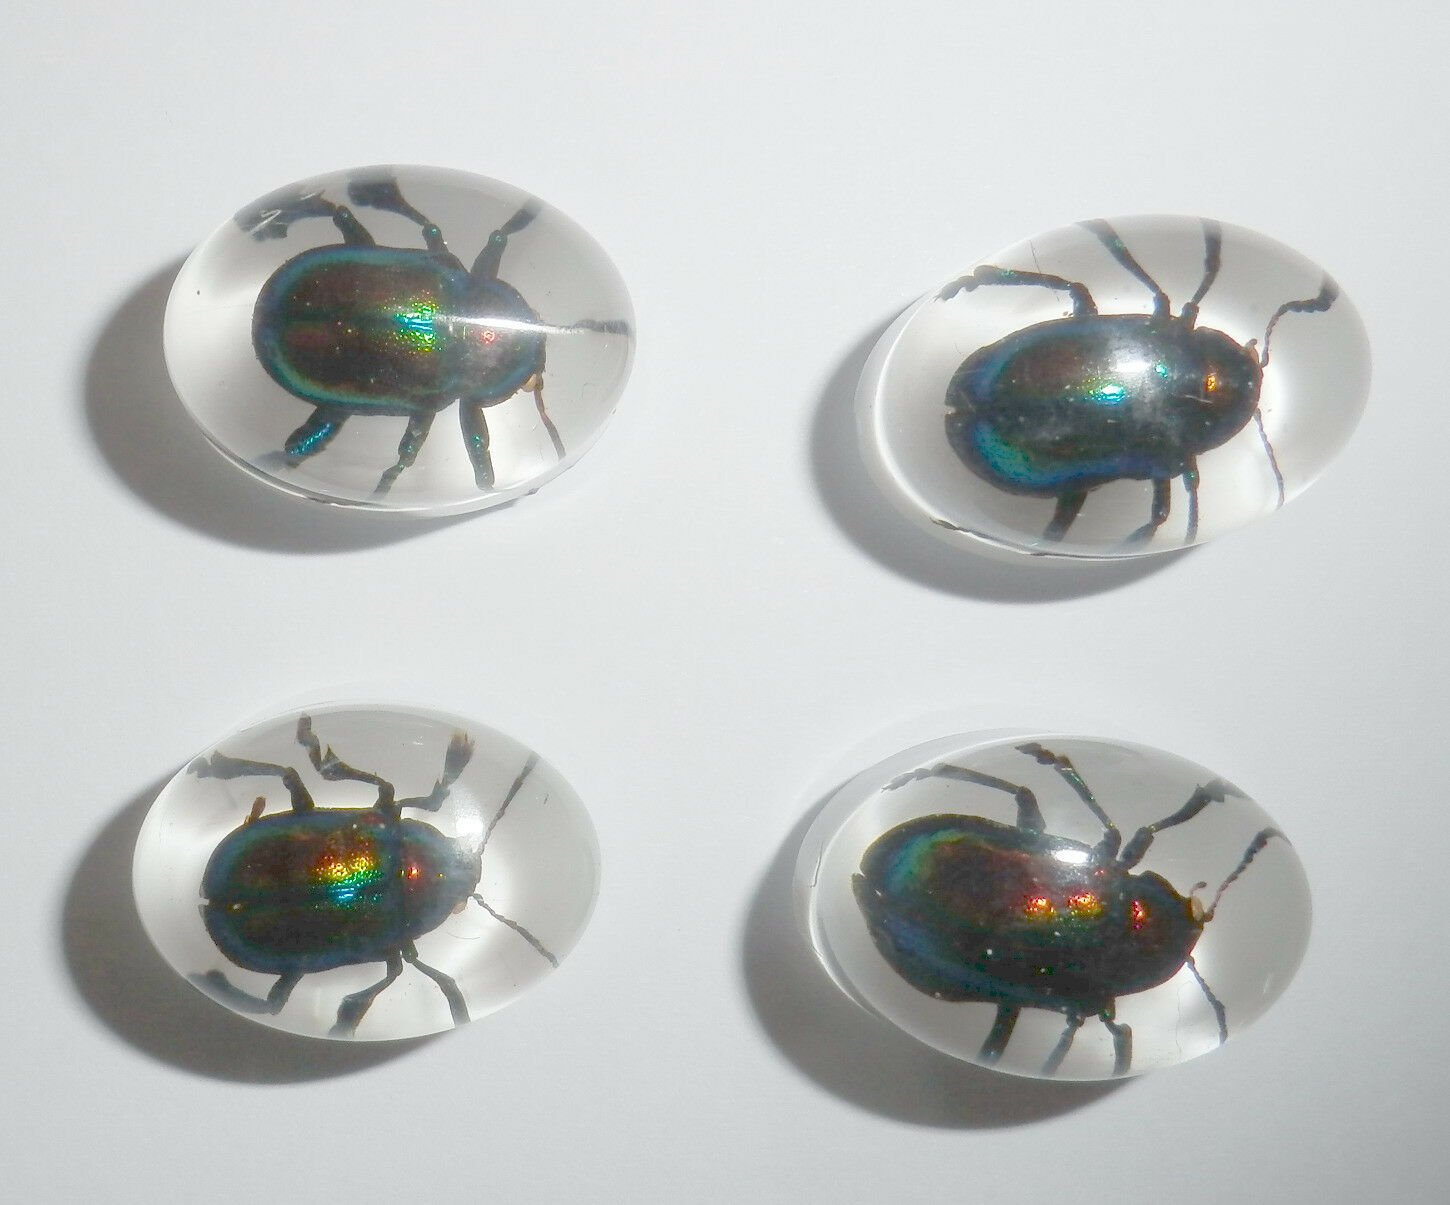 Insect Cabochon Shining Leaf Beetle Oval 12x18 Mm White Bottom 5 Pieces Lot